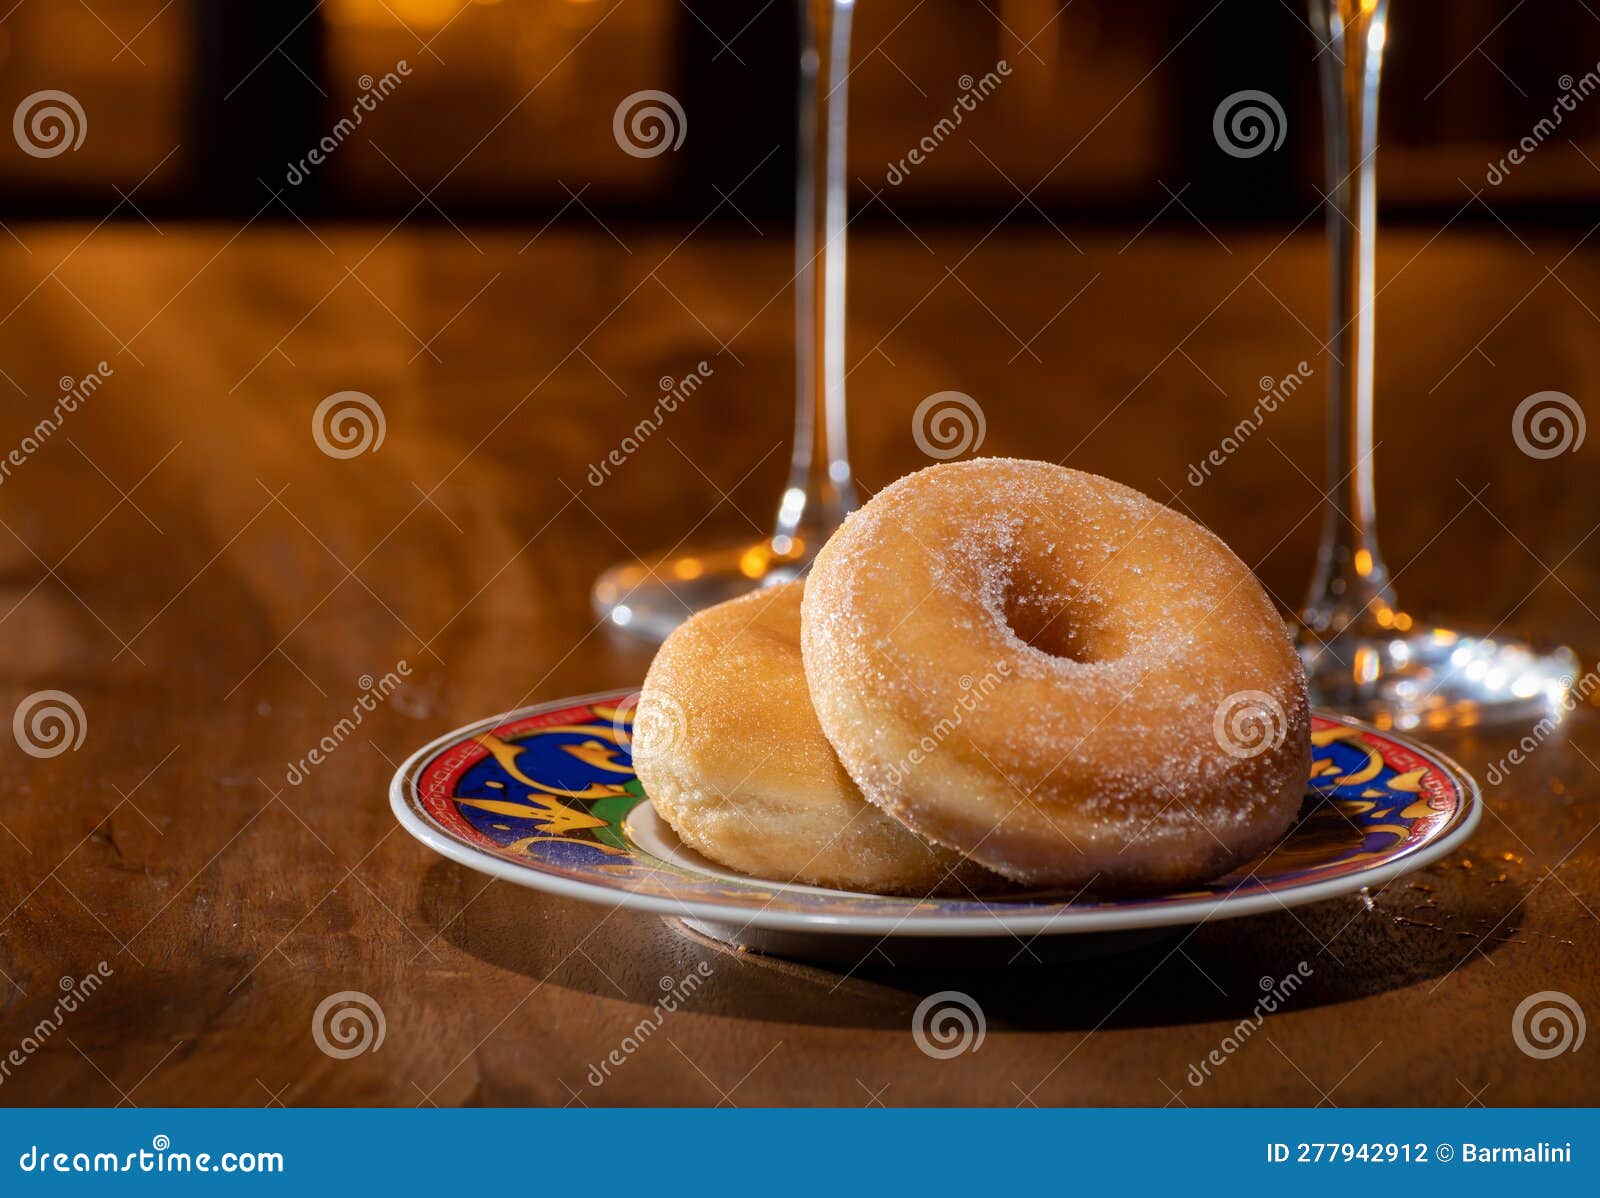 fresh baked doughnuts or donuts sweet dessert americal style glazed with sugar